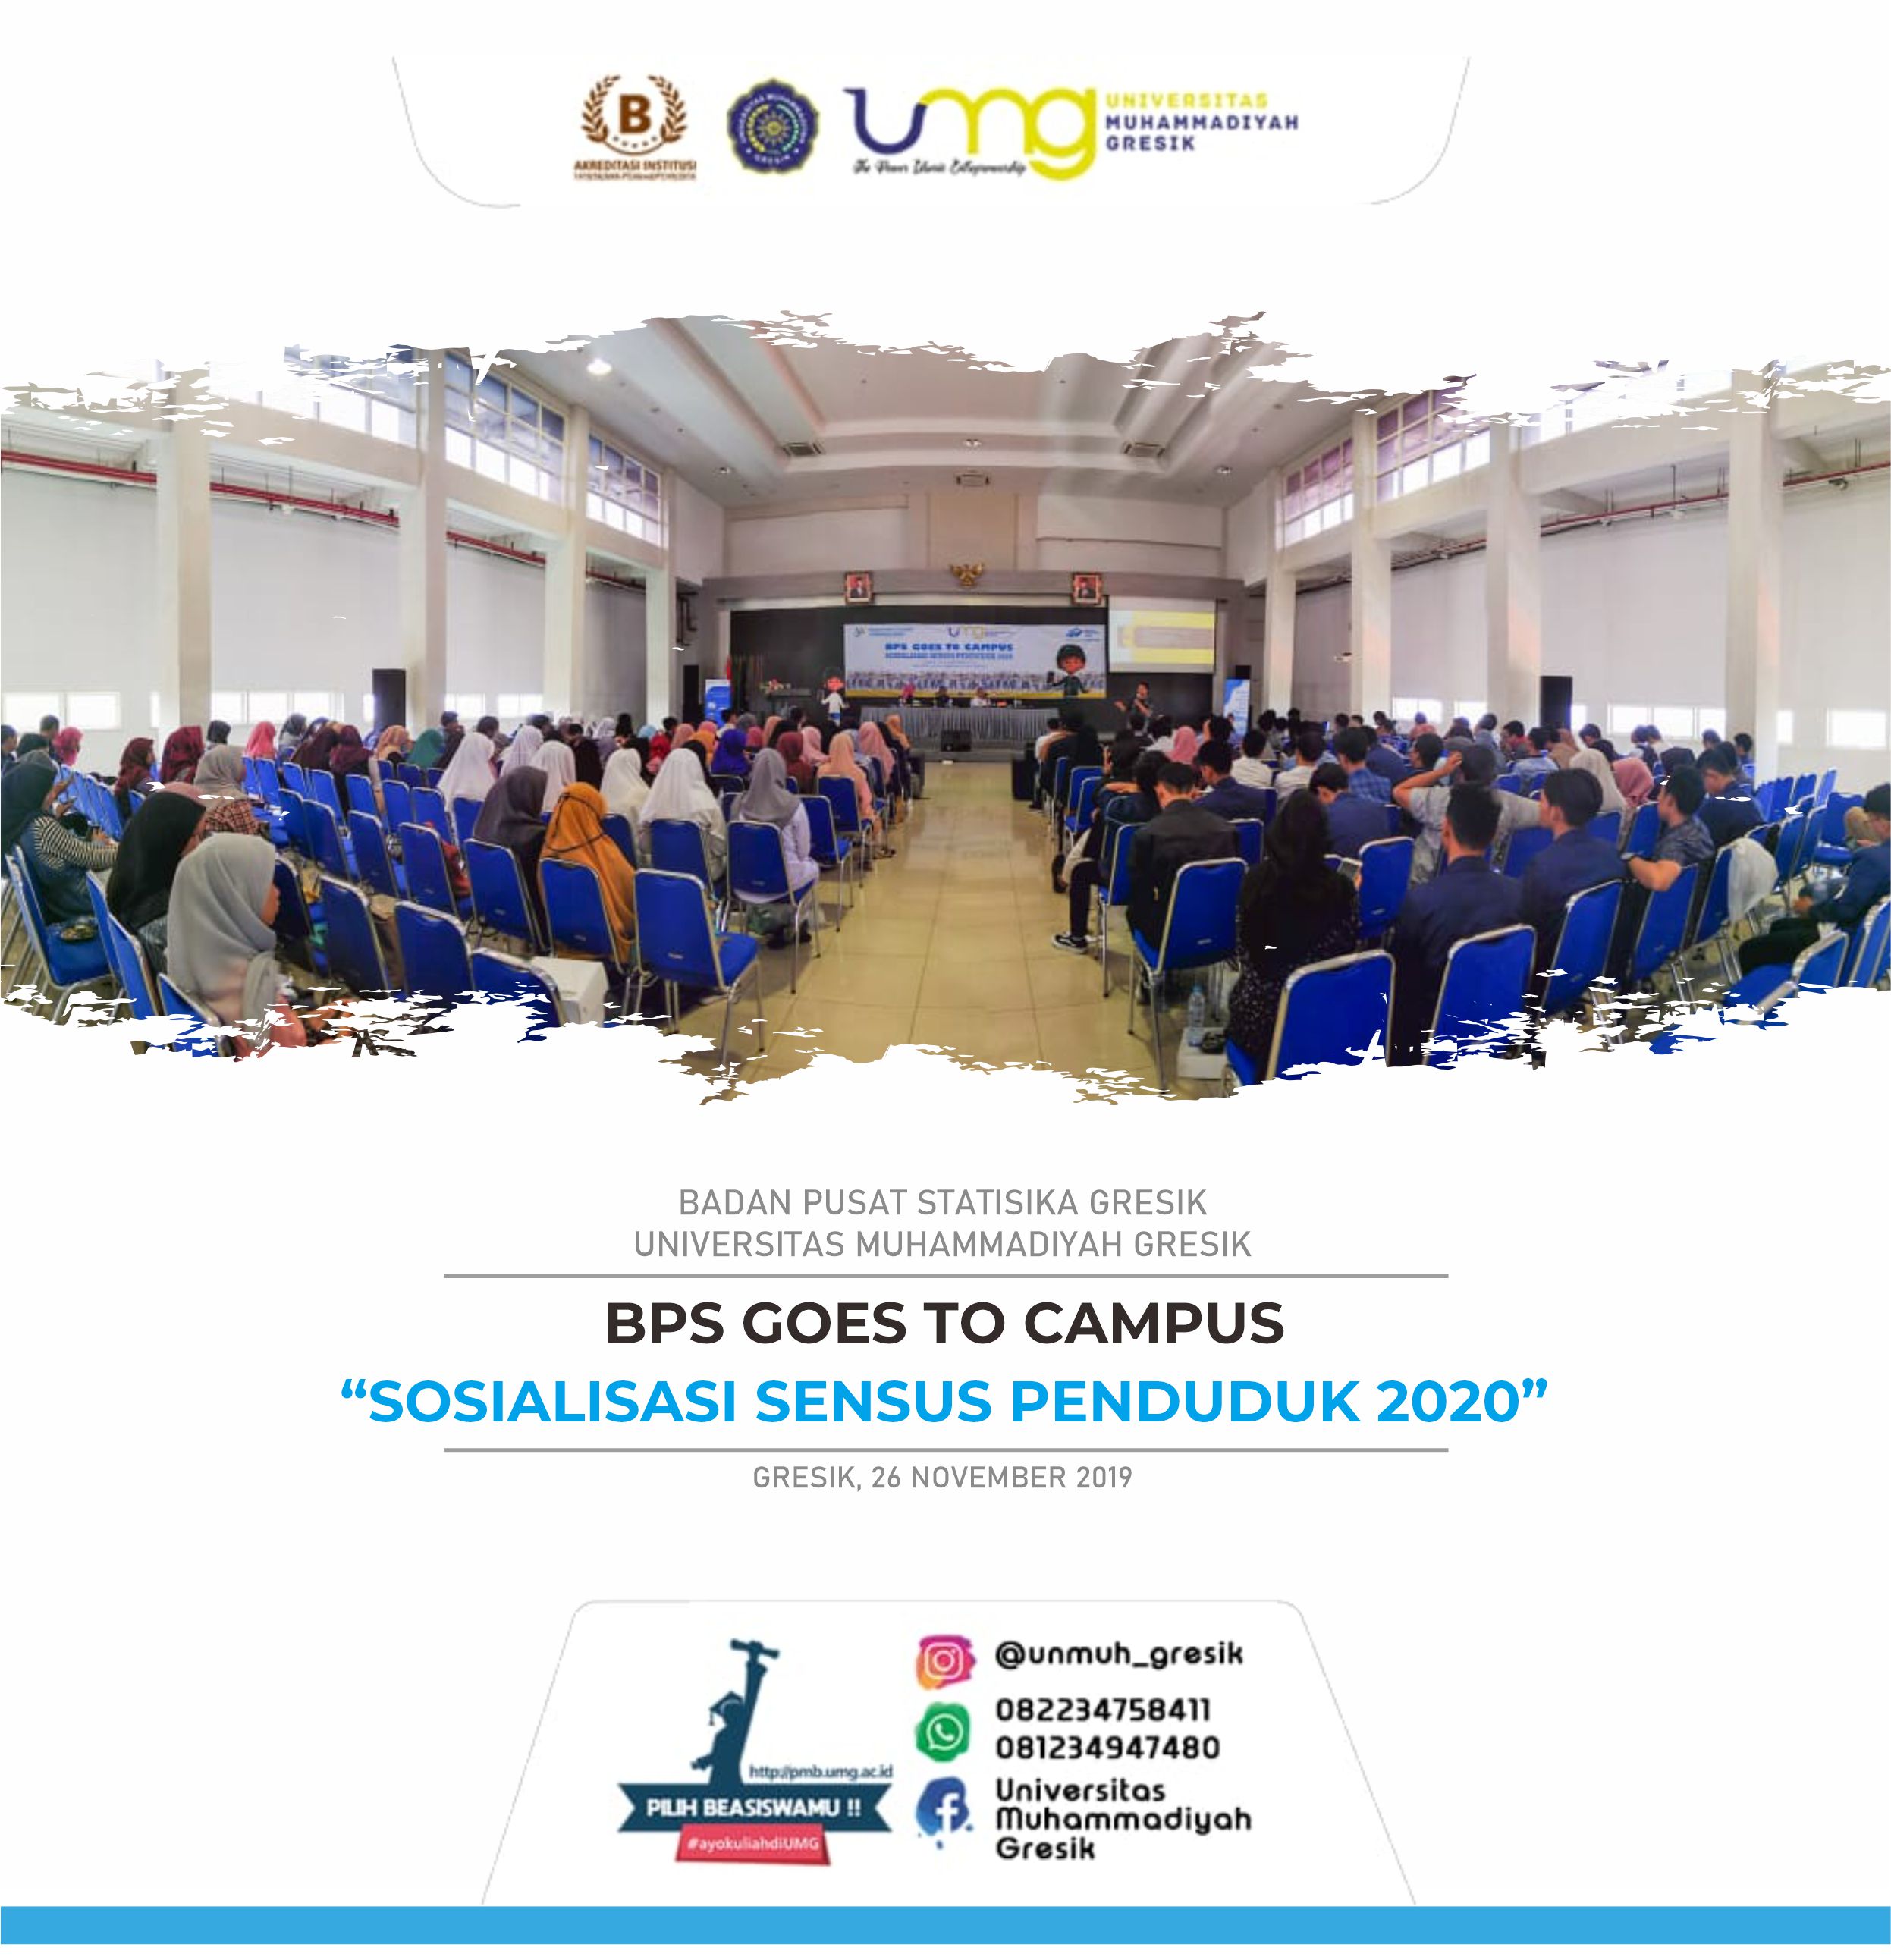 BPS Goes to campus.jpg (483 KB)